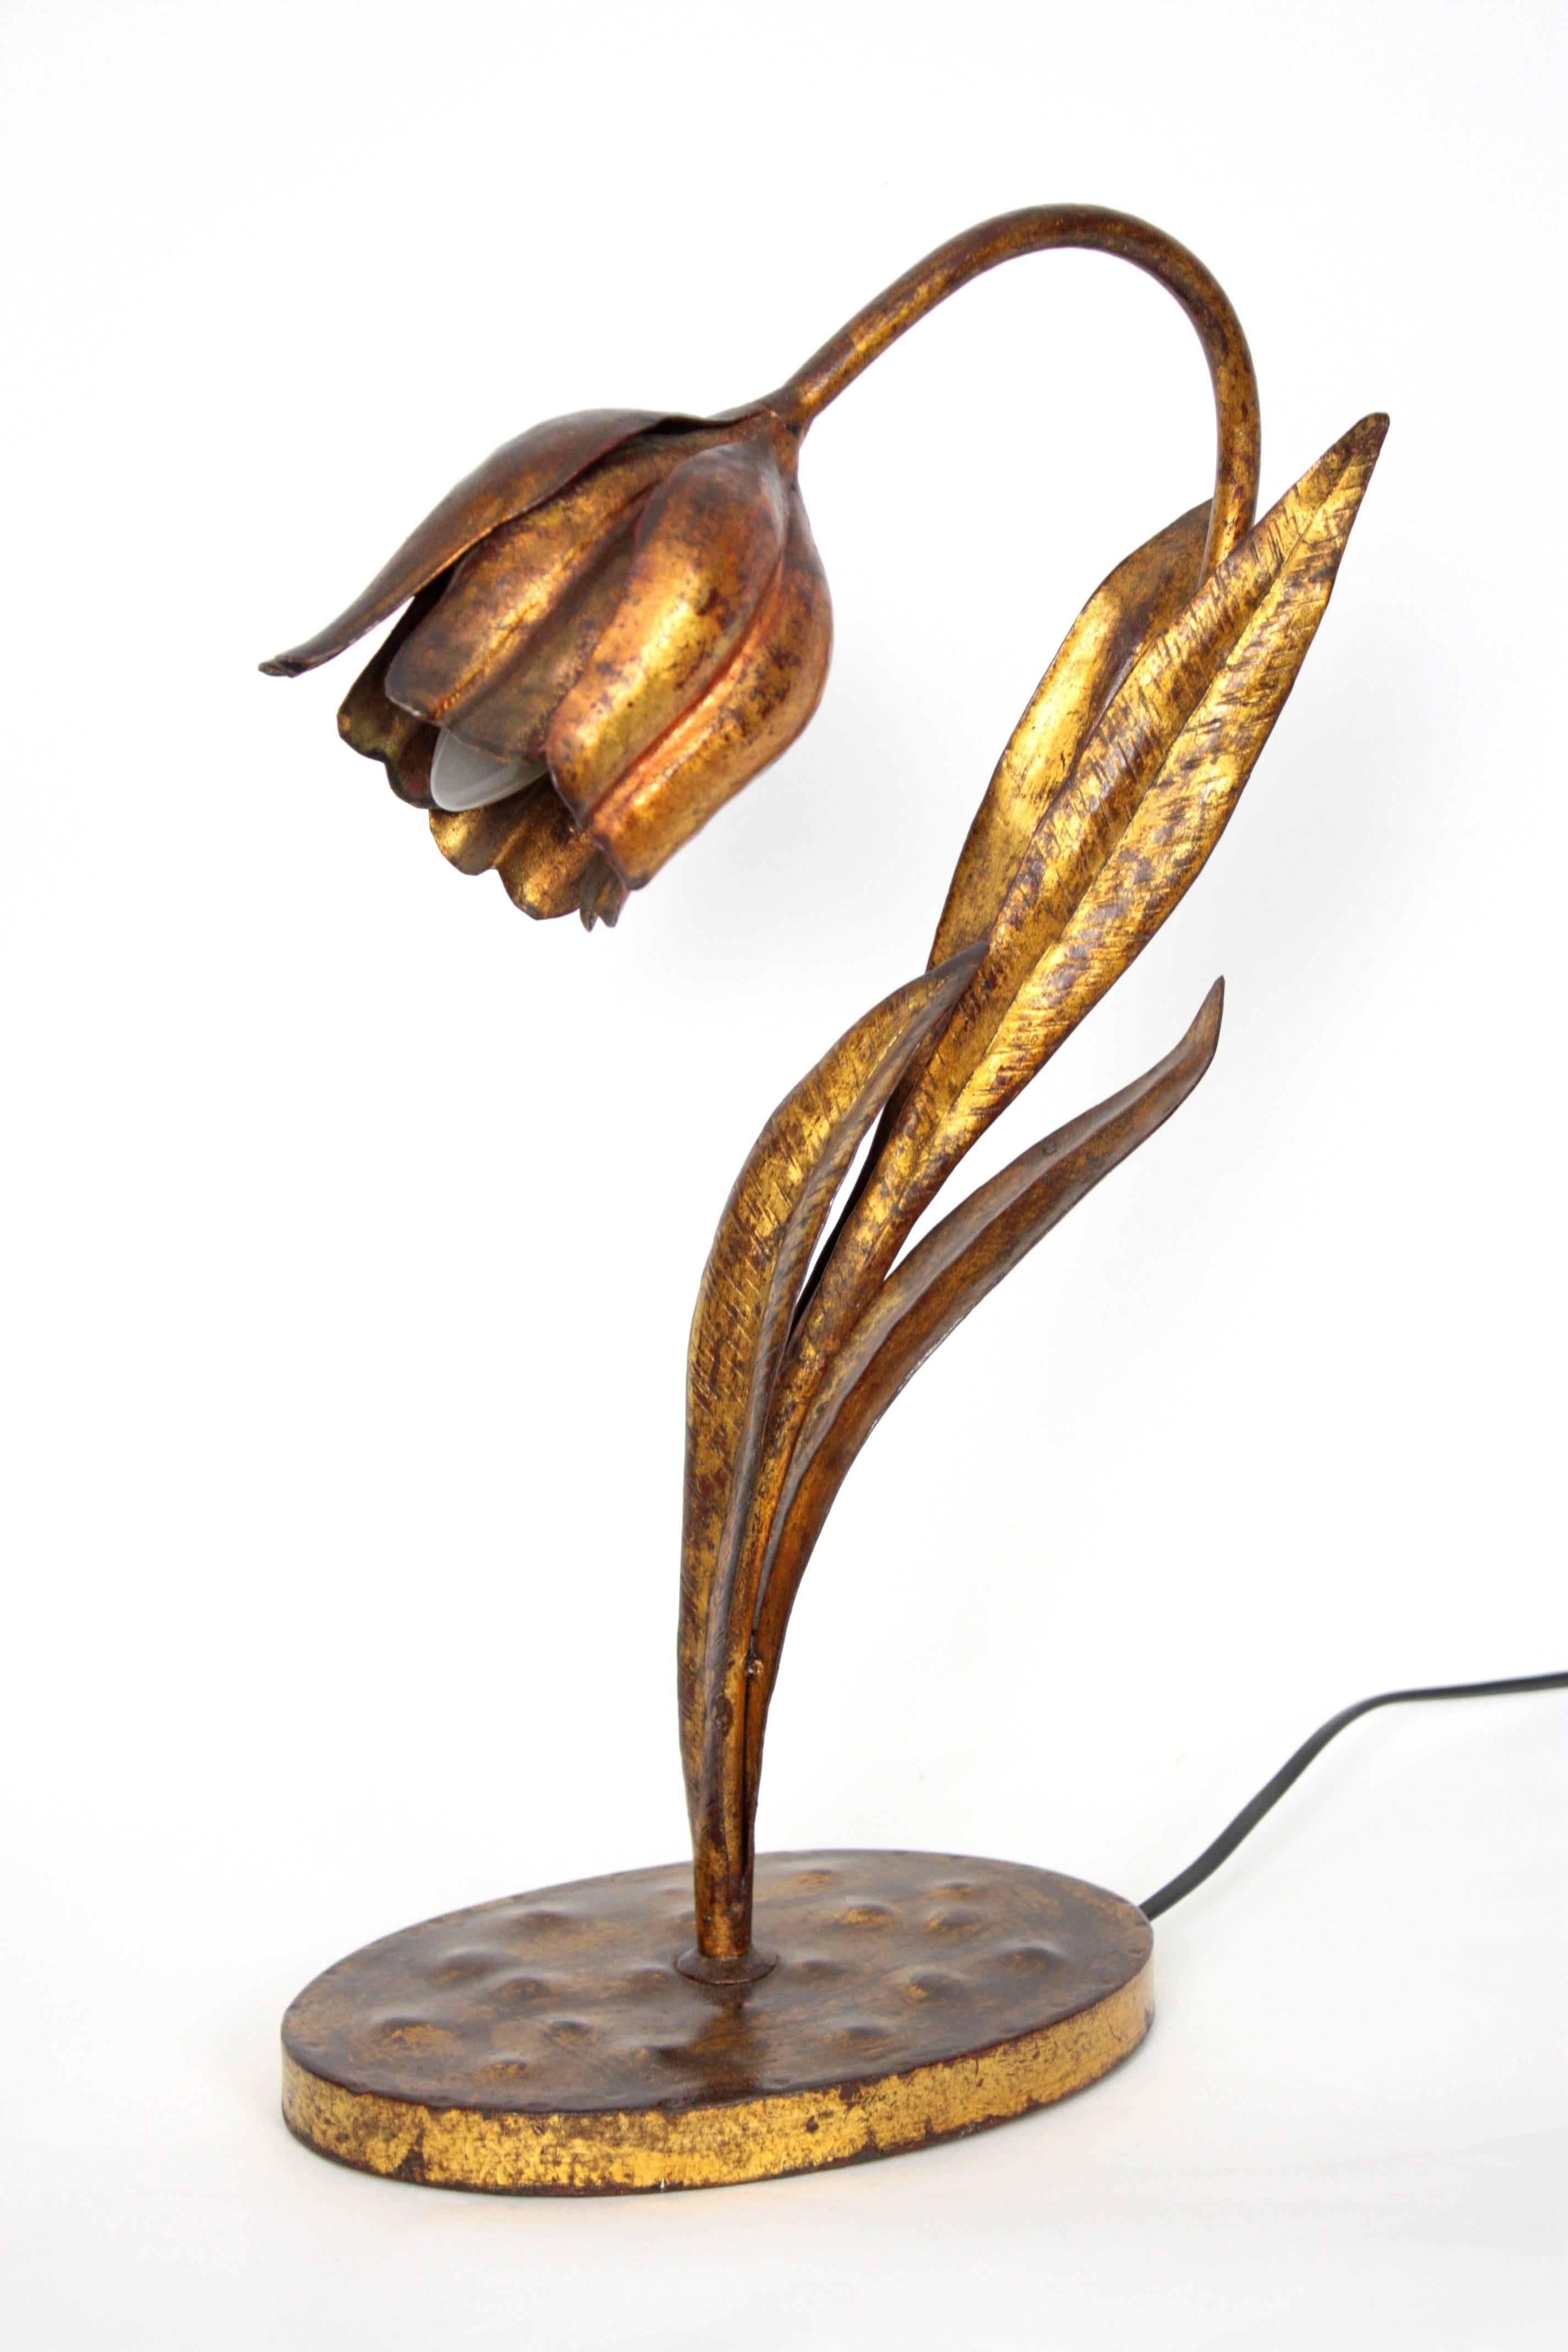 Sculptural Art Nouveau gilt iron table lamp with flower shape. The lamp has an amazing vintage patina with gold leaf finish and it is in excellent condition,
France, circa 1900.